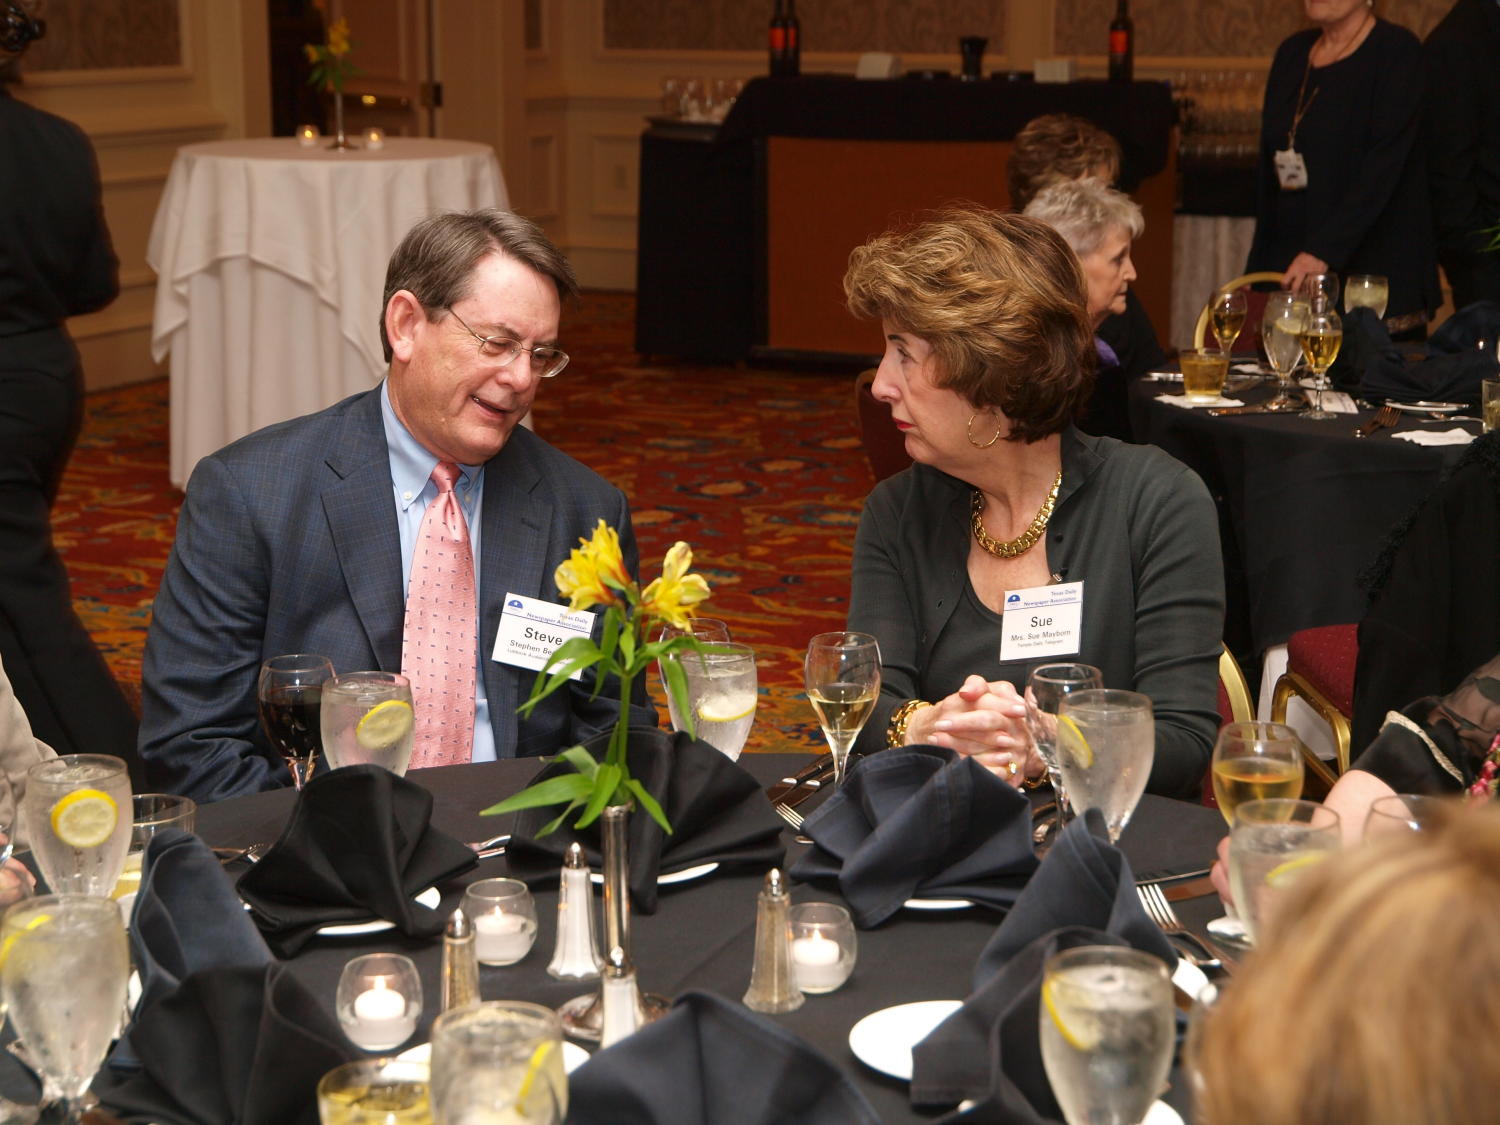 [Sue Mayborn attending TDNA dinner], Photograph of Sue Mayborn (right) sitting at a dinner table and chatting with a man identified as Stephen "Steve" Bea--, they are dressed in their finest attire, in attendance at the 2008 Texas Daily Newspaper Association annual conference awards dinner, held at The Westin Riverwalk Hotel in San Antonio, Texas., 